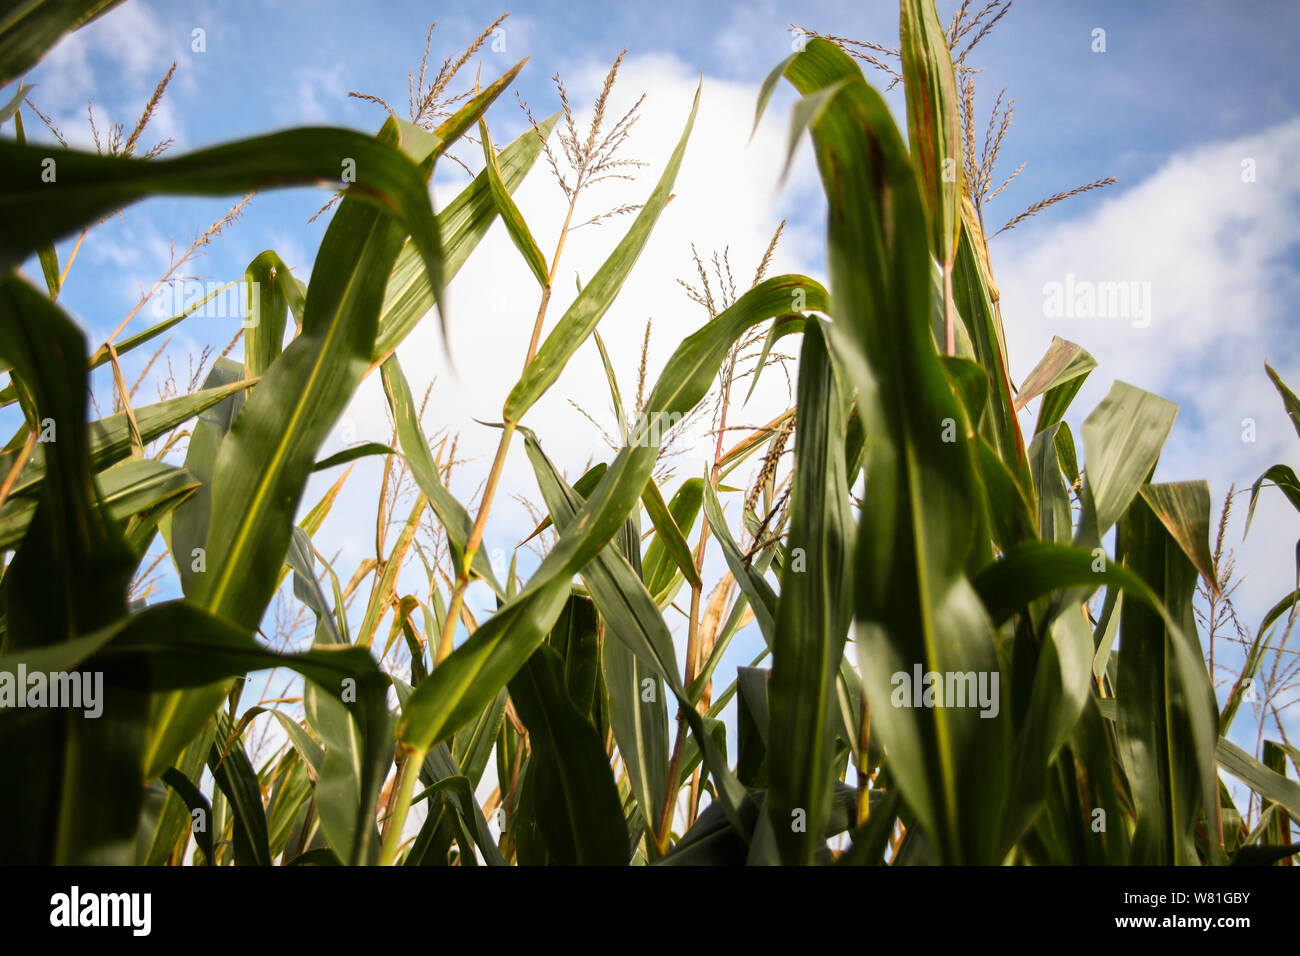 Corn Stalks against Cloudy Sky, Low Angle View Stock Photo